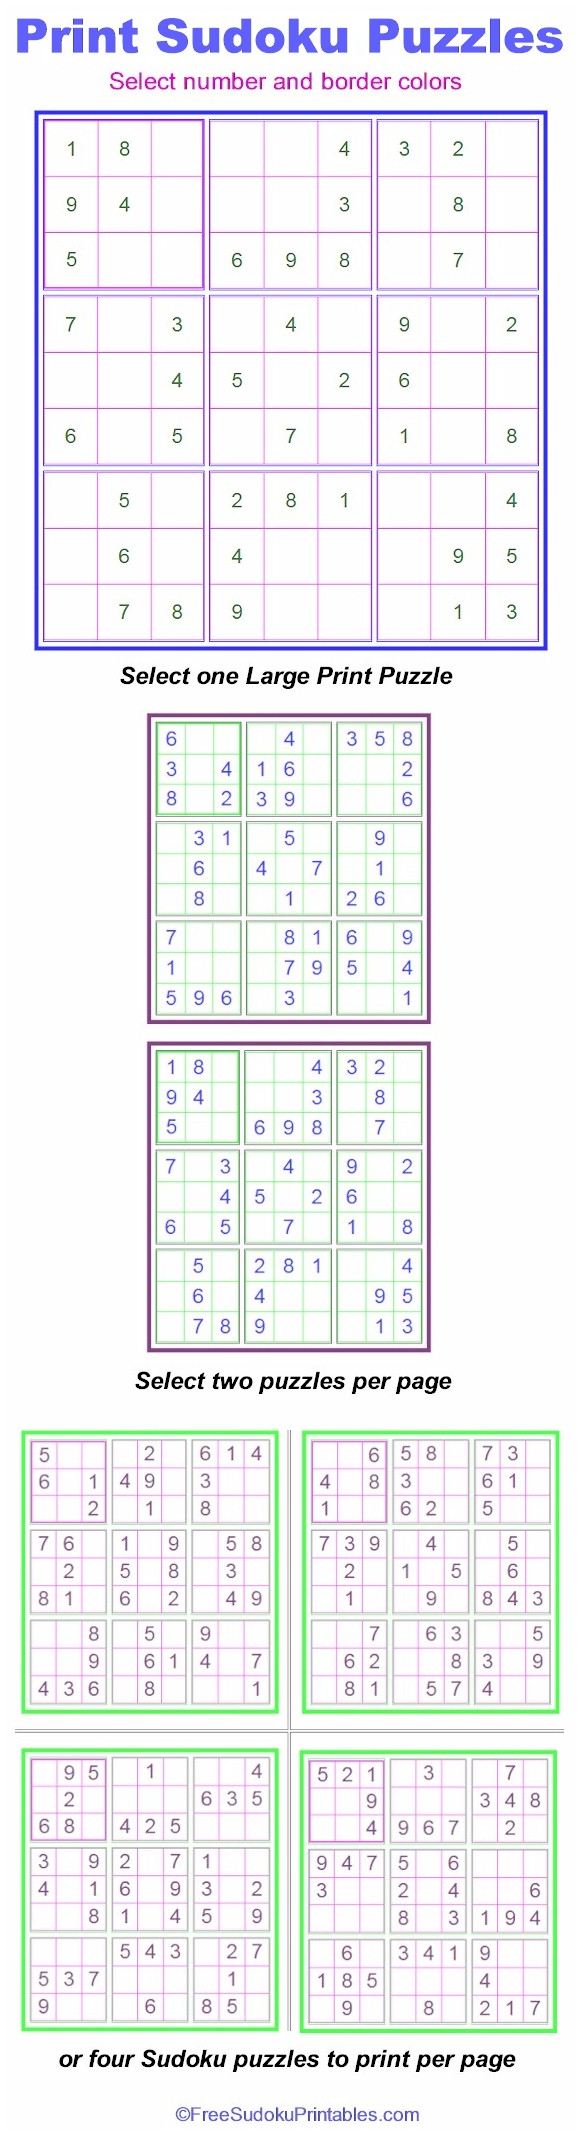 Print Sudoku Puzzles - Hundreds of Sudoku puzzles that you can print for all levels. 